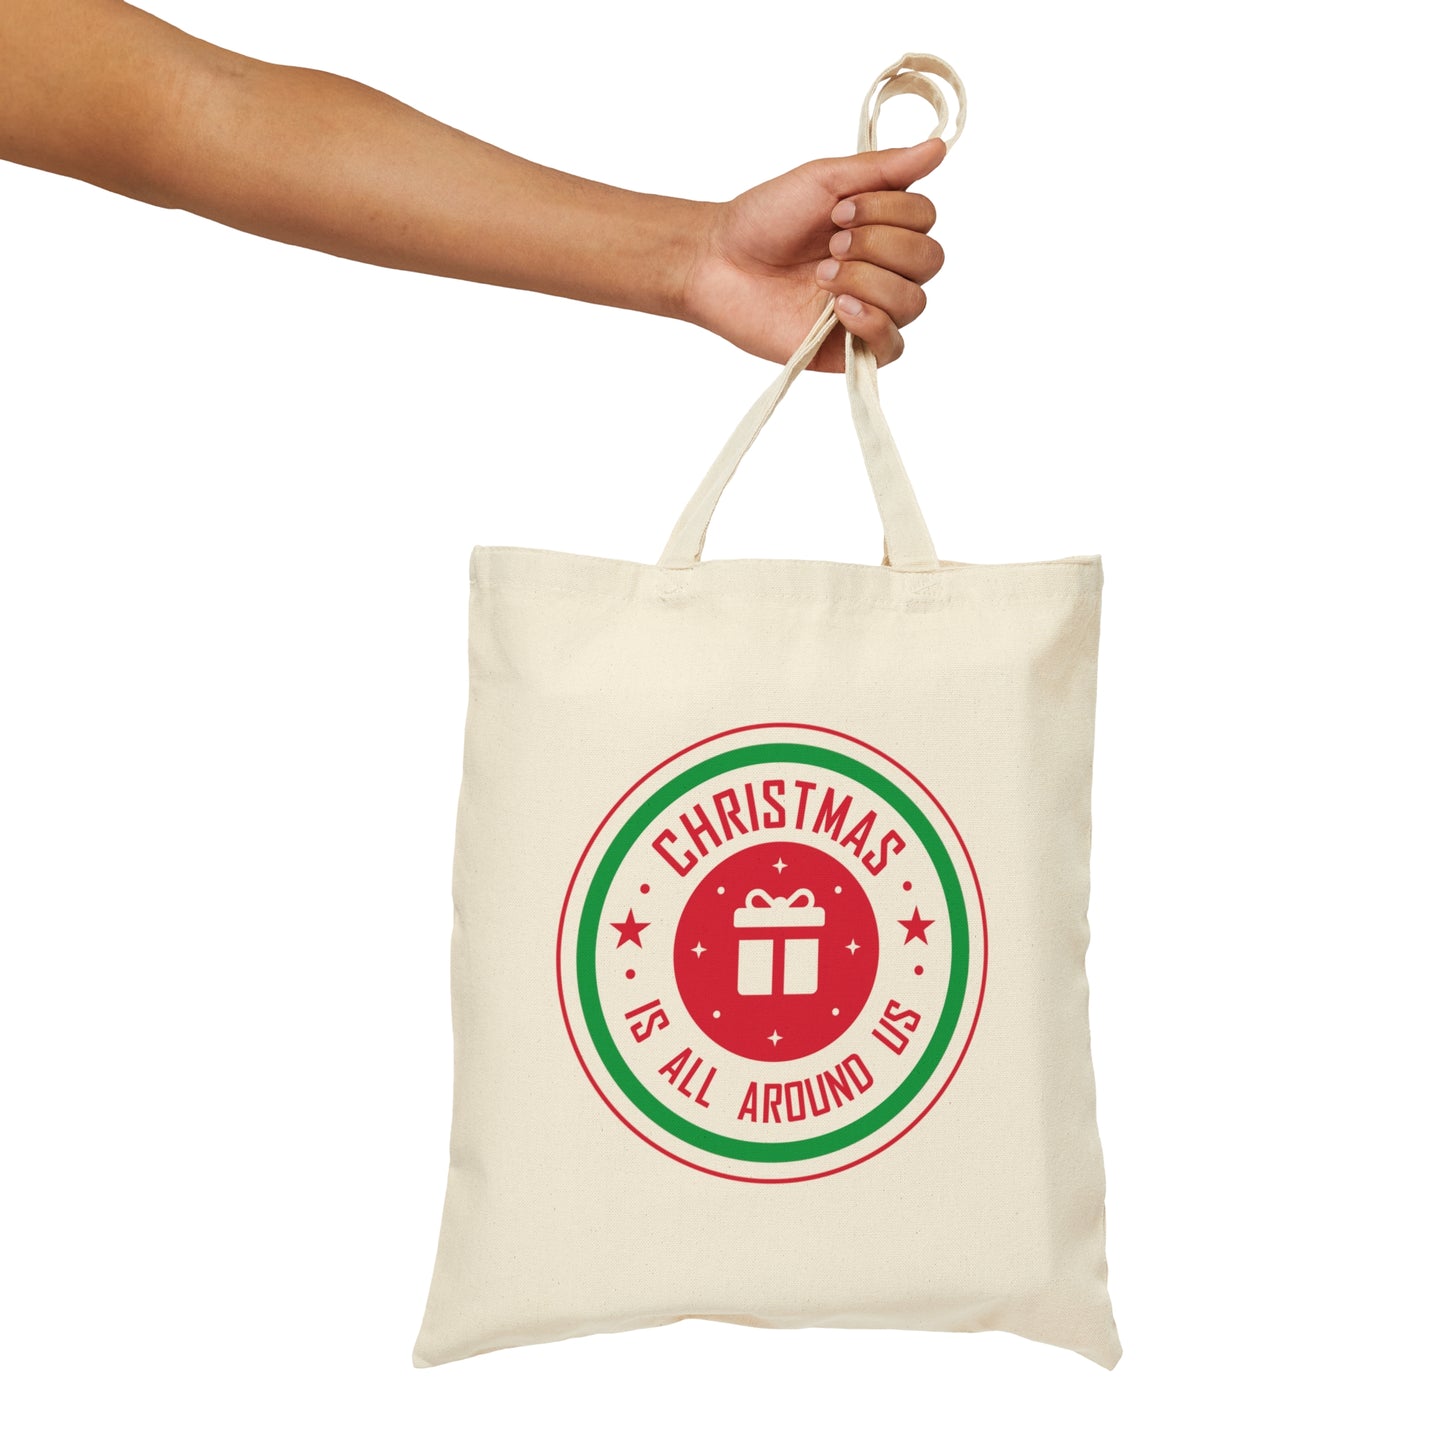 Christmas is all around us Funny Christmas Quotes Canvas Shopping Cotton Tote Bag